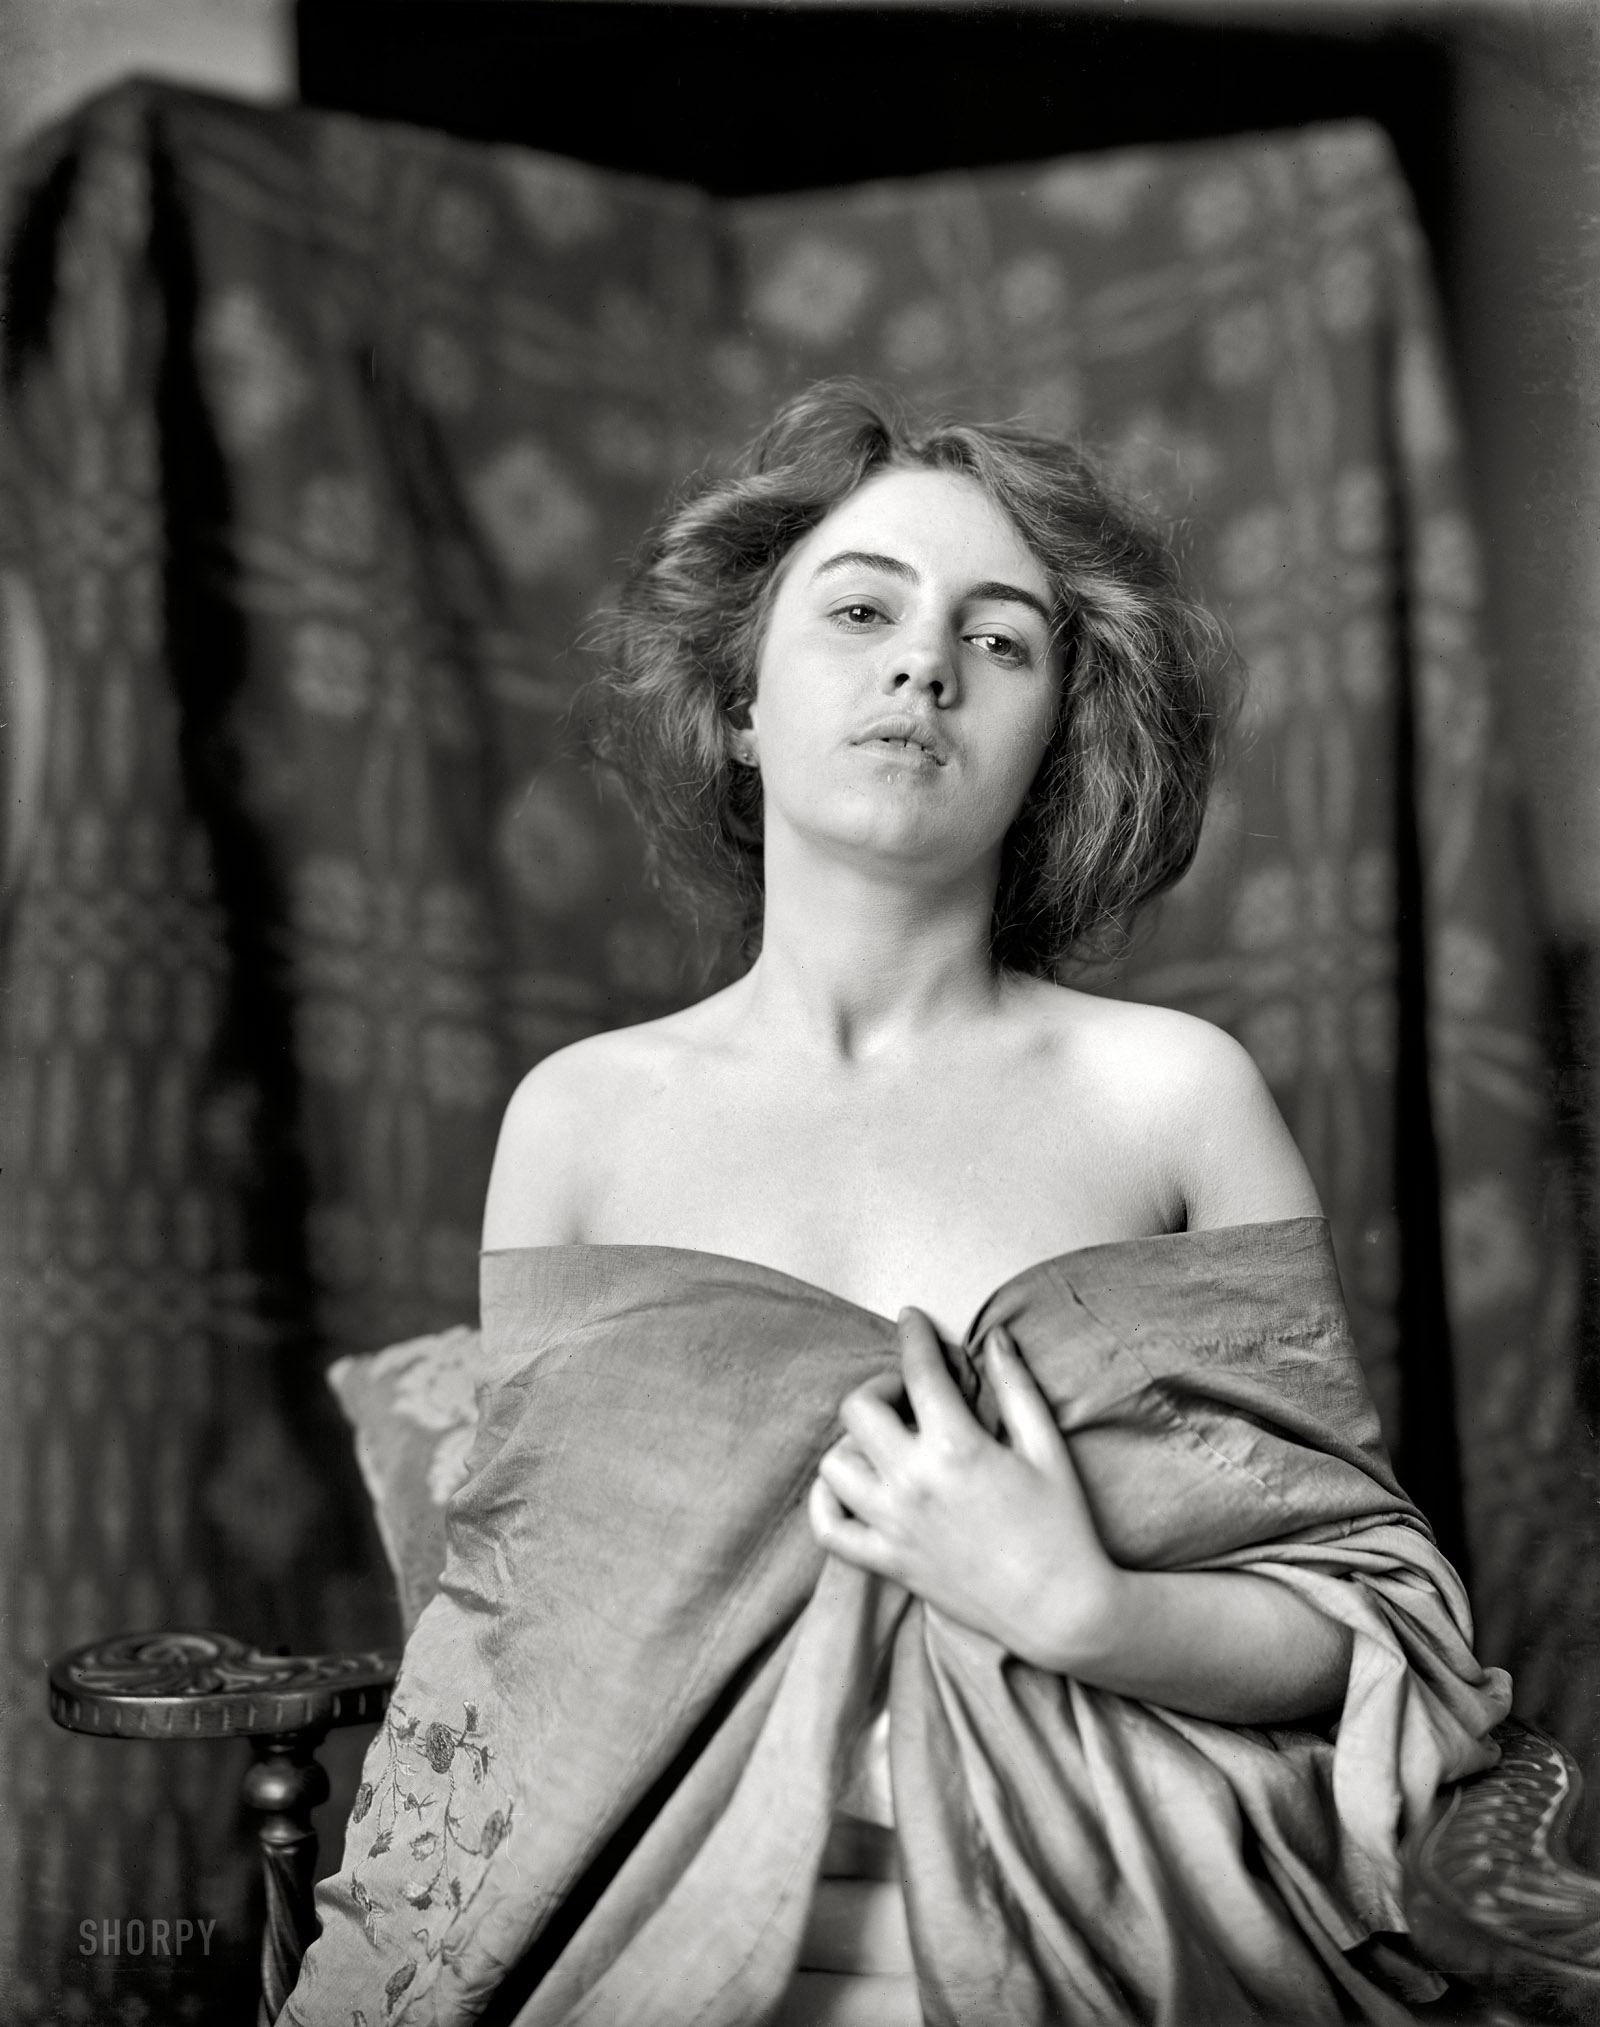 Circa 1900. "Model, hair loose." Previously seen here in the guises of Thisbe and Amorita. 8x10 inch glass negative, Detroit Publishing Co. View full size.